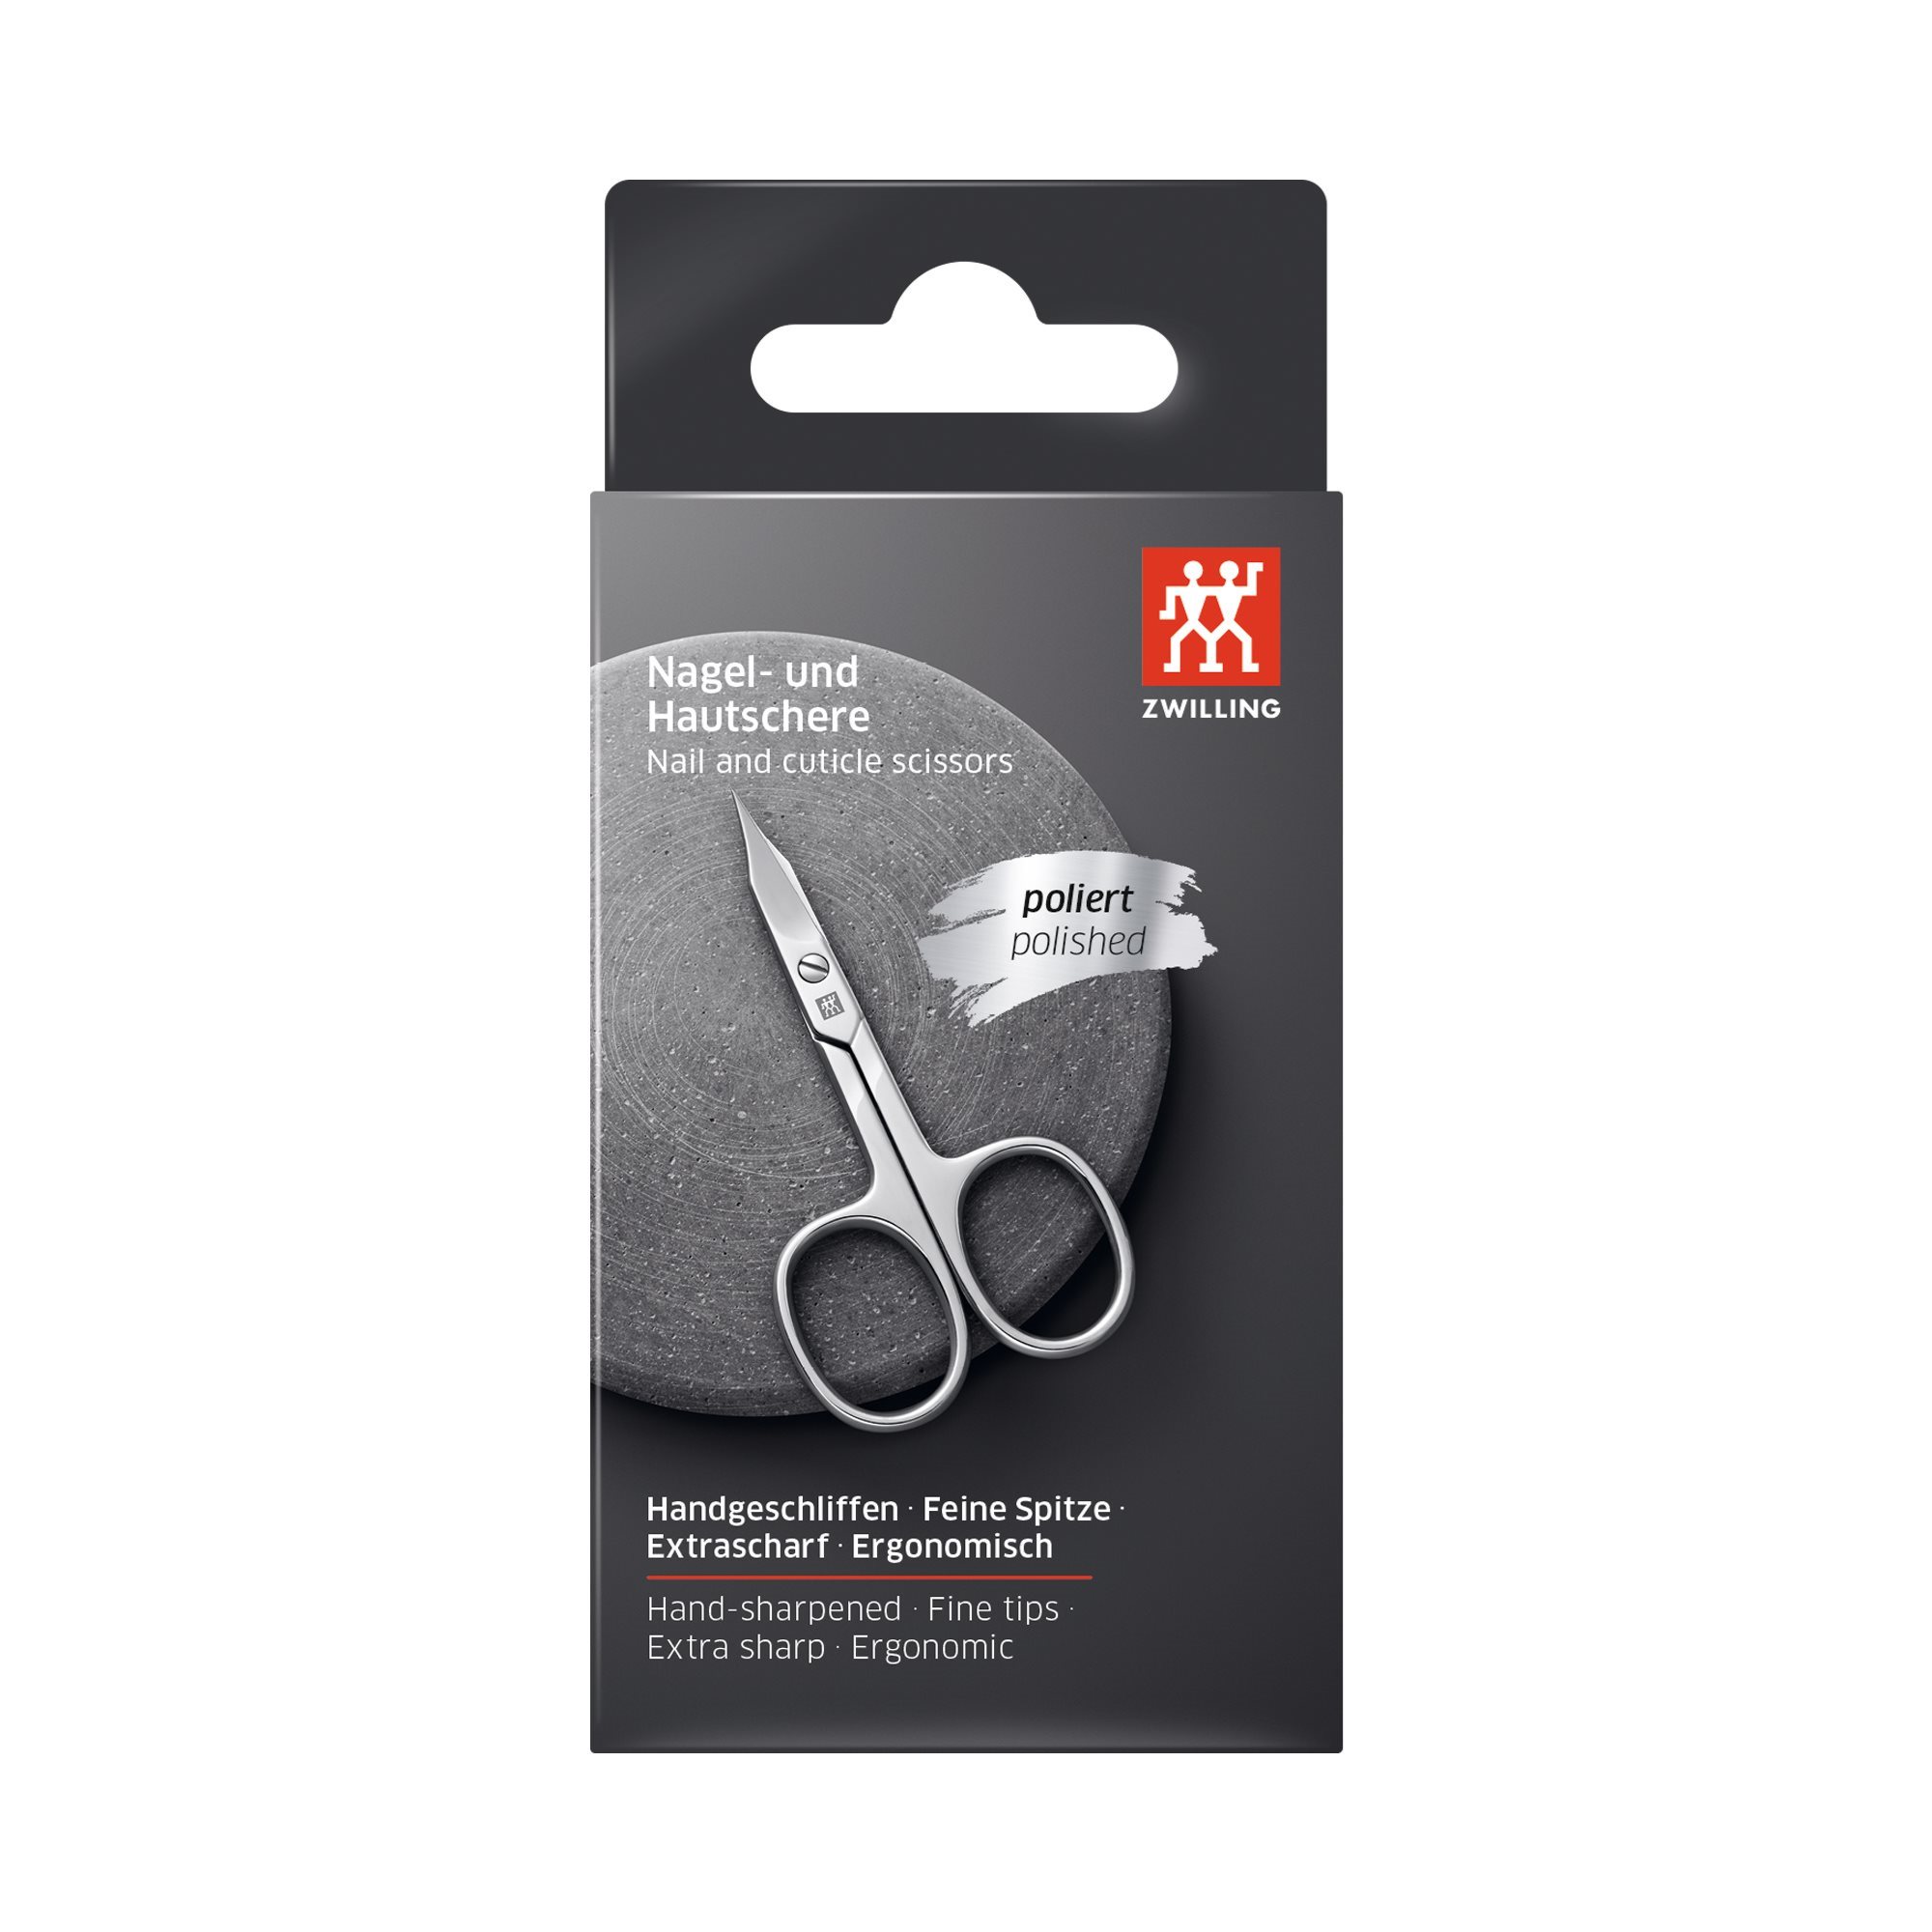 Nail and | Classic KitchenShop TWIN cuticle Zwilling scissor, 